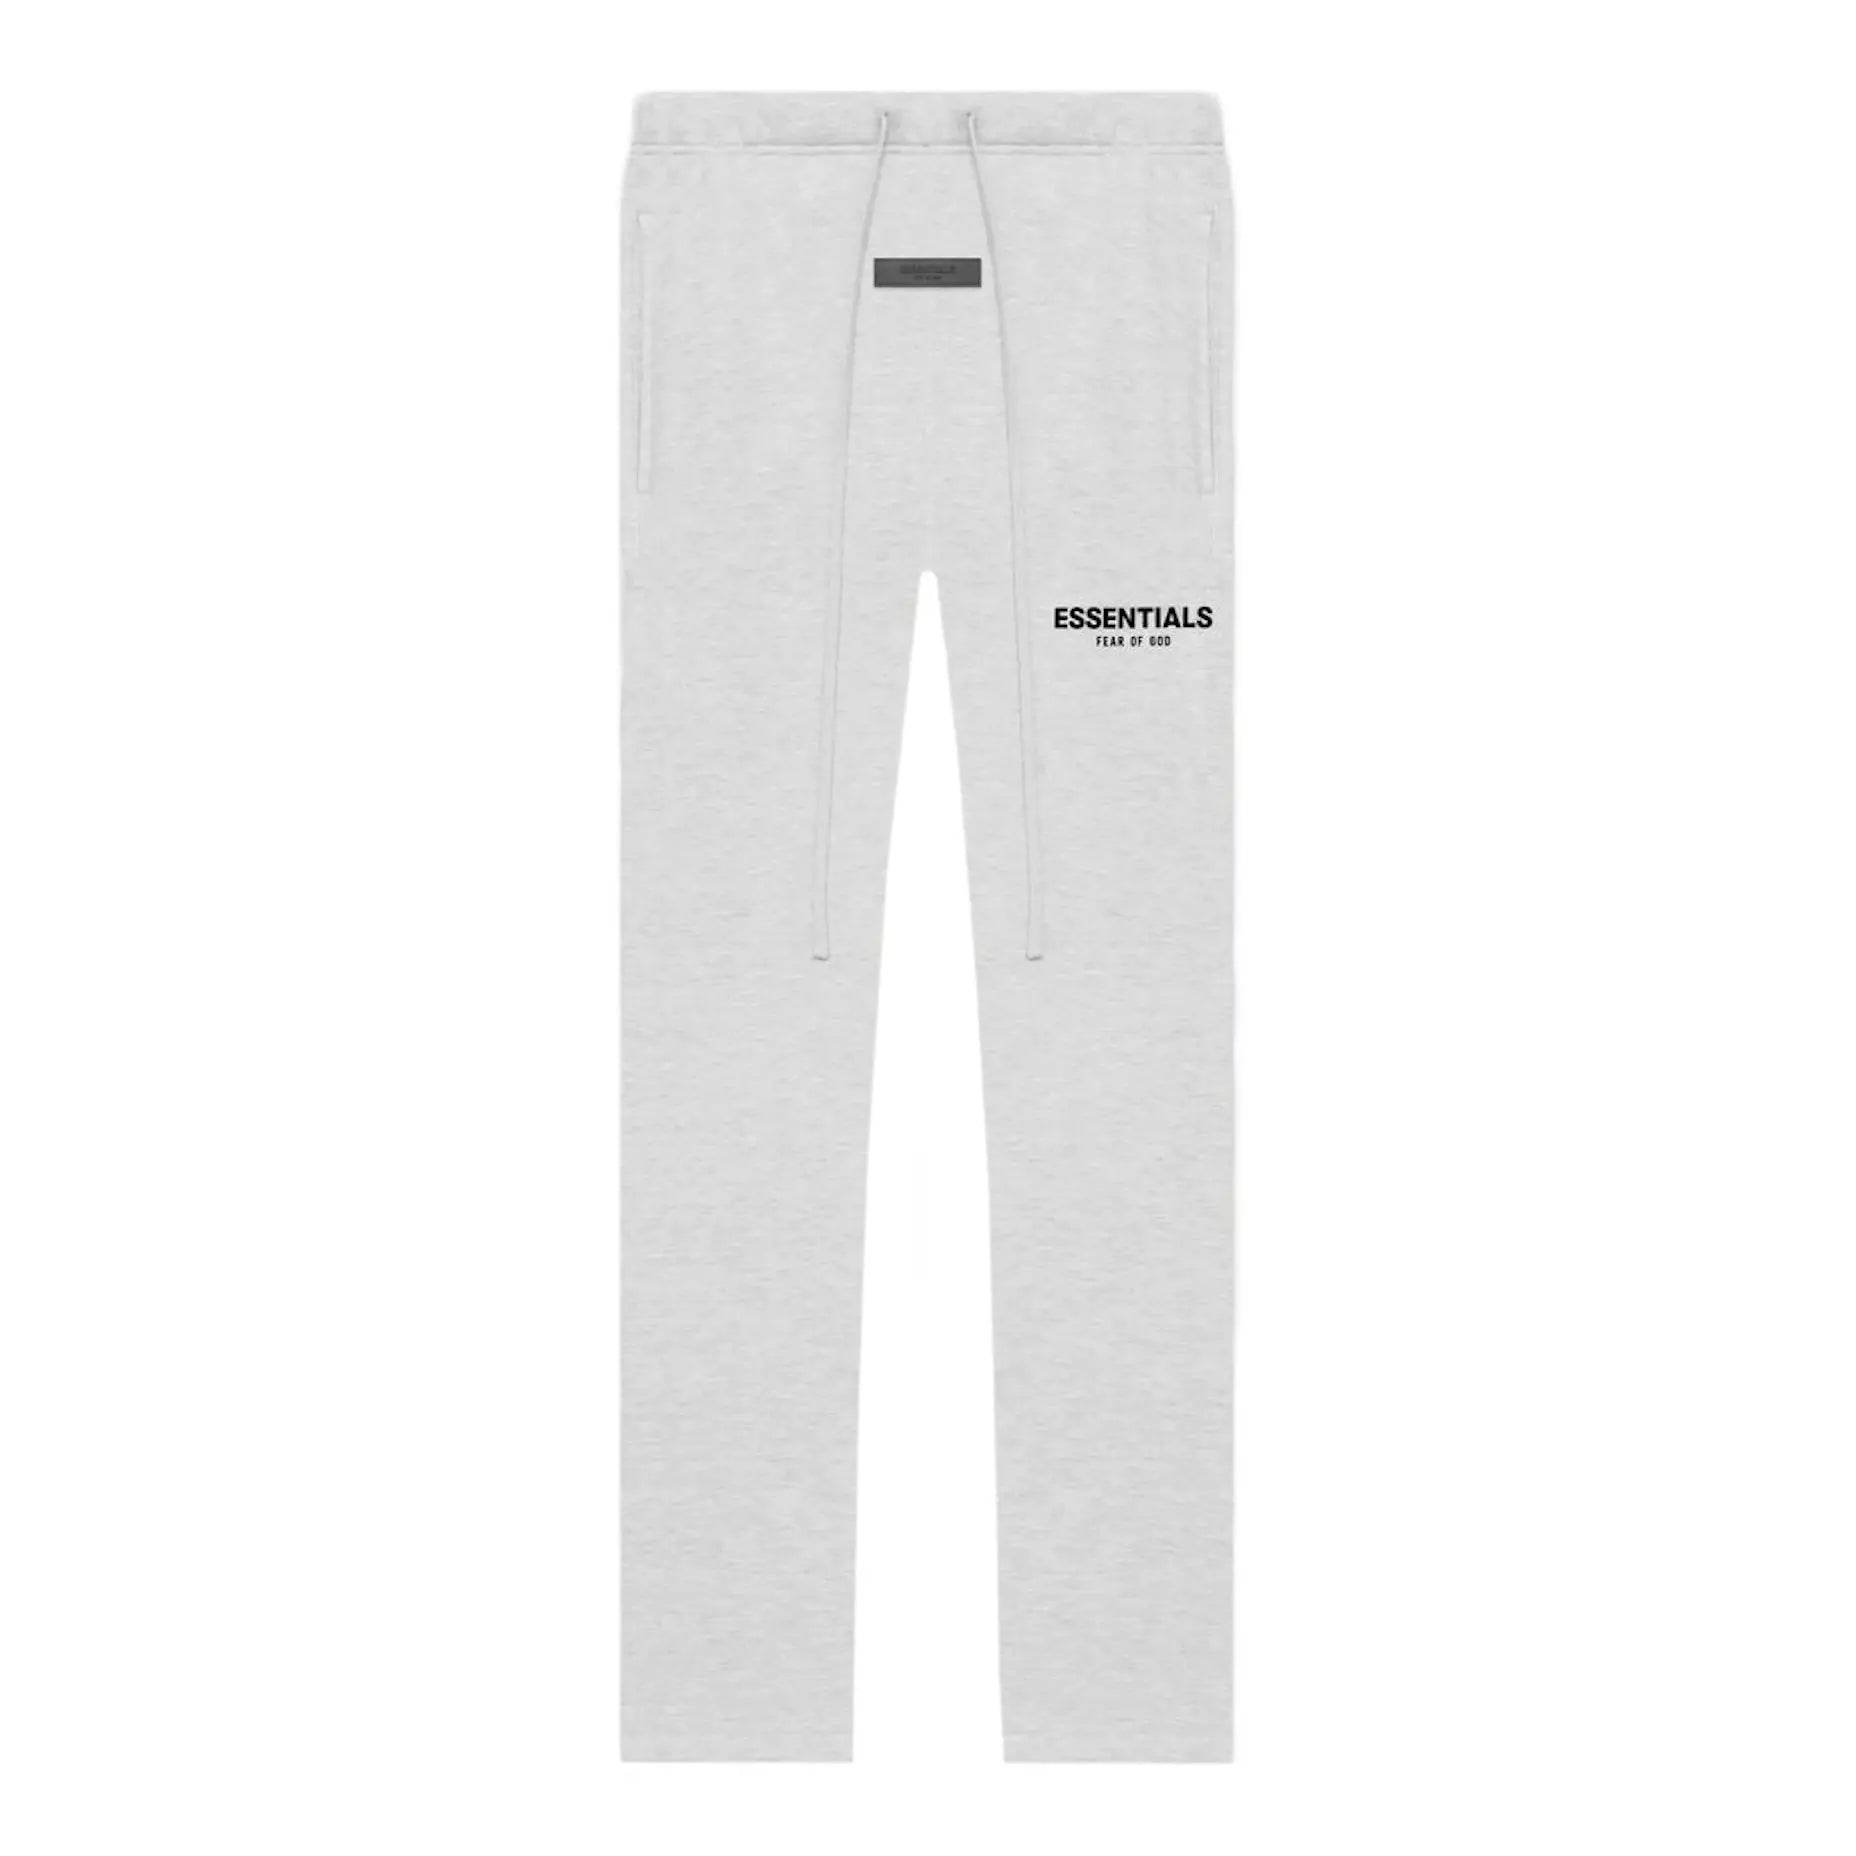 Essentials - Relaxed Sweatpants (Light Oatmeal)